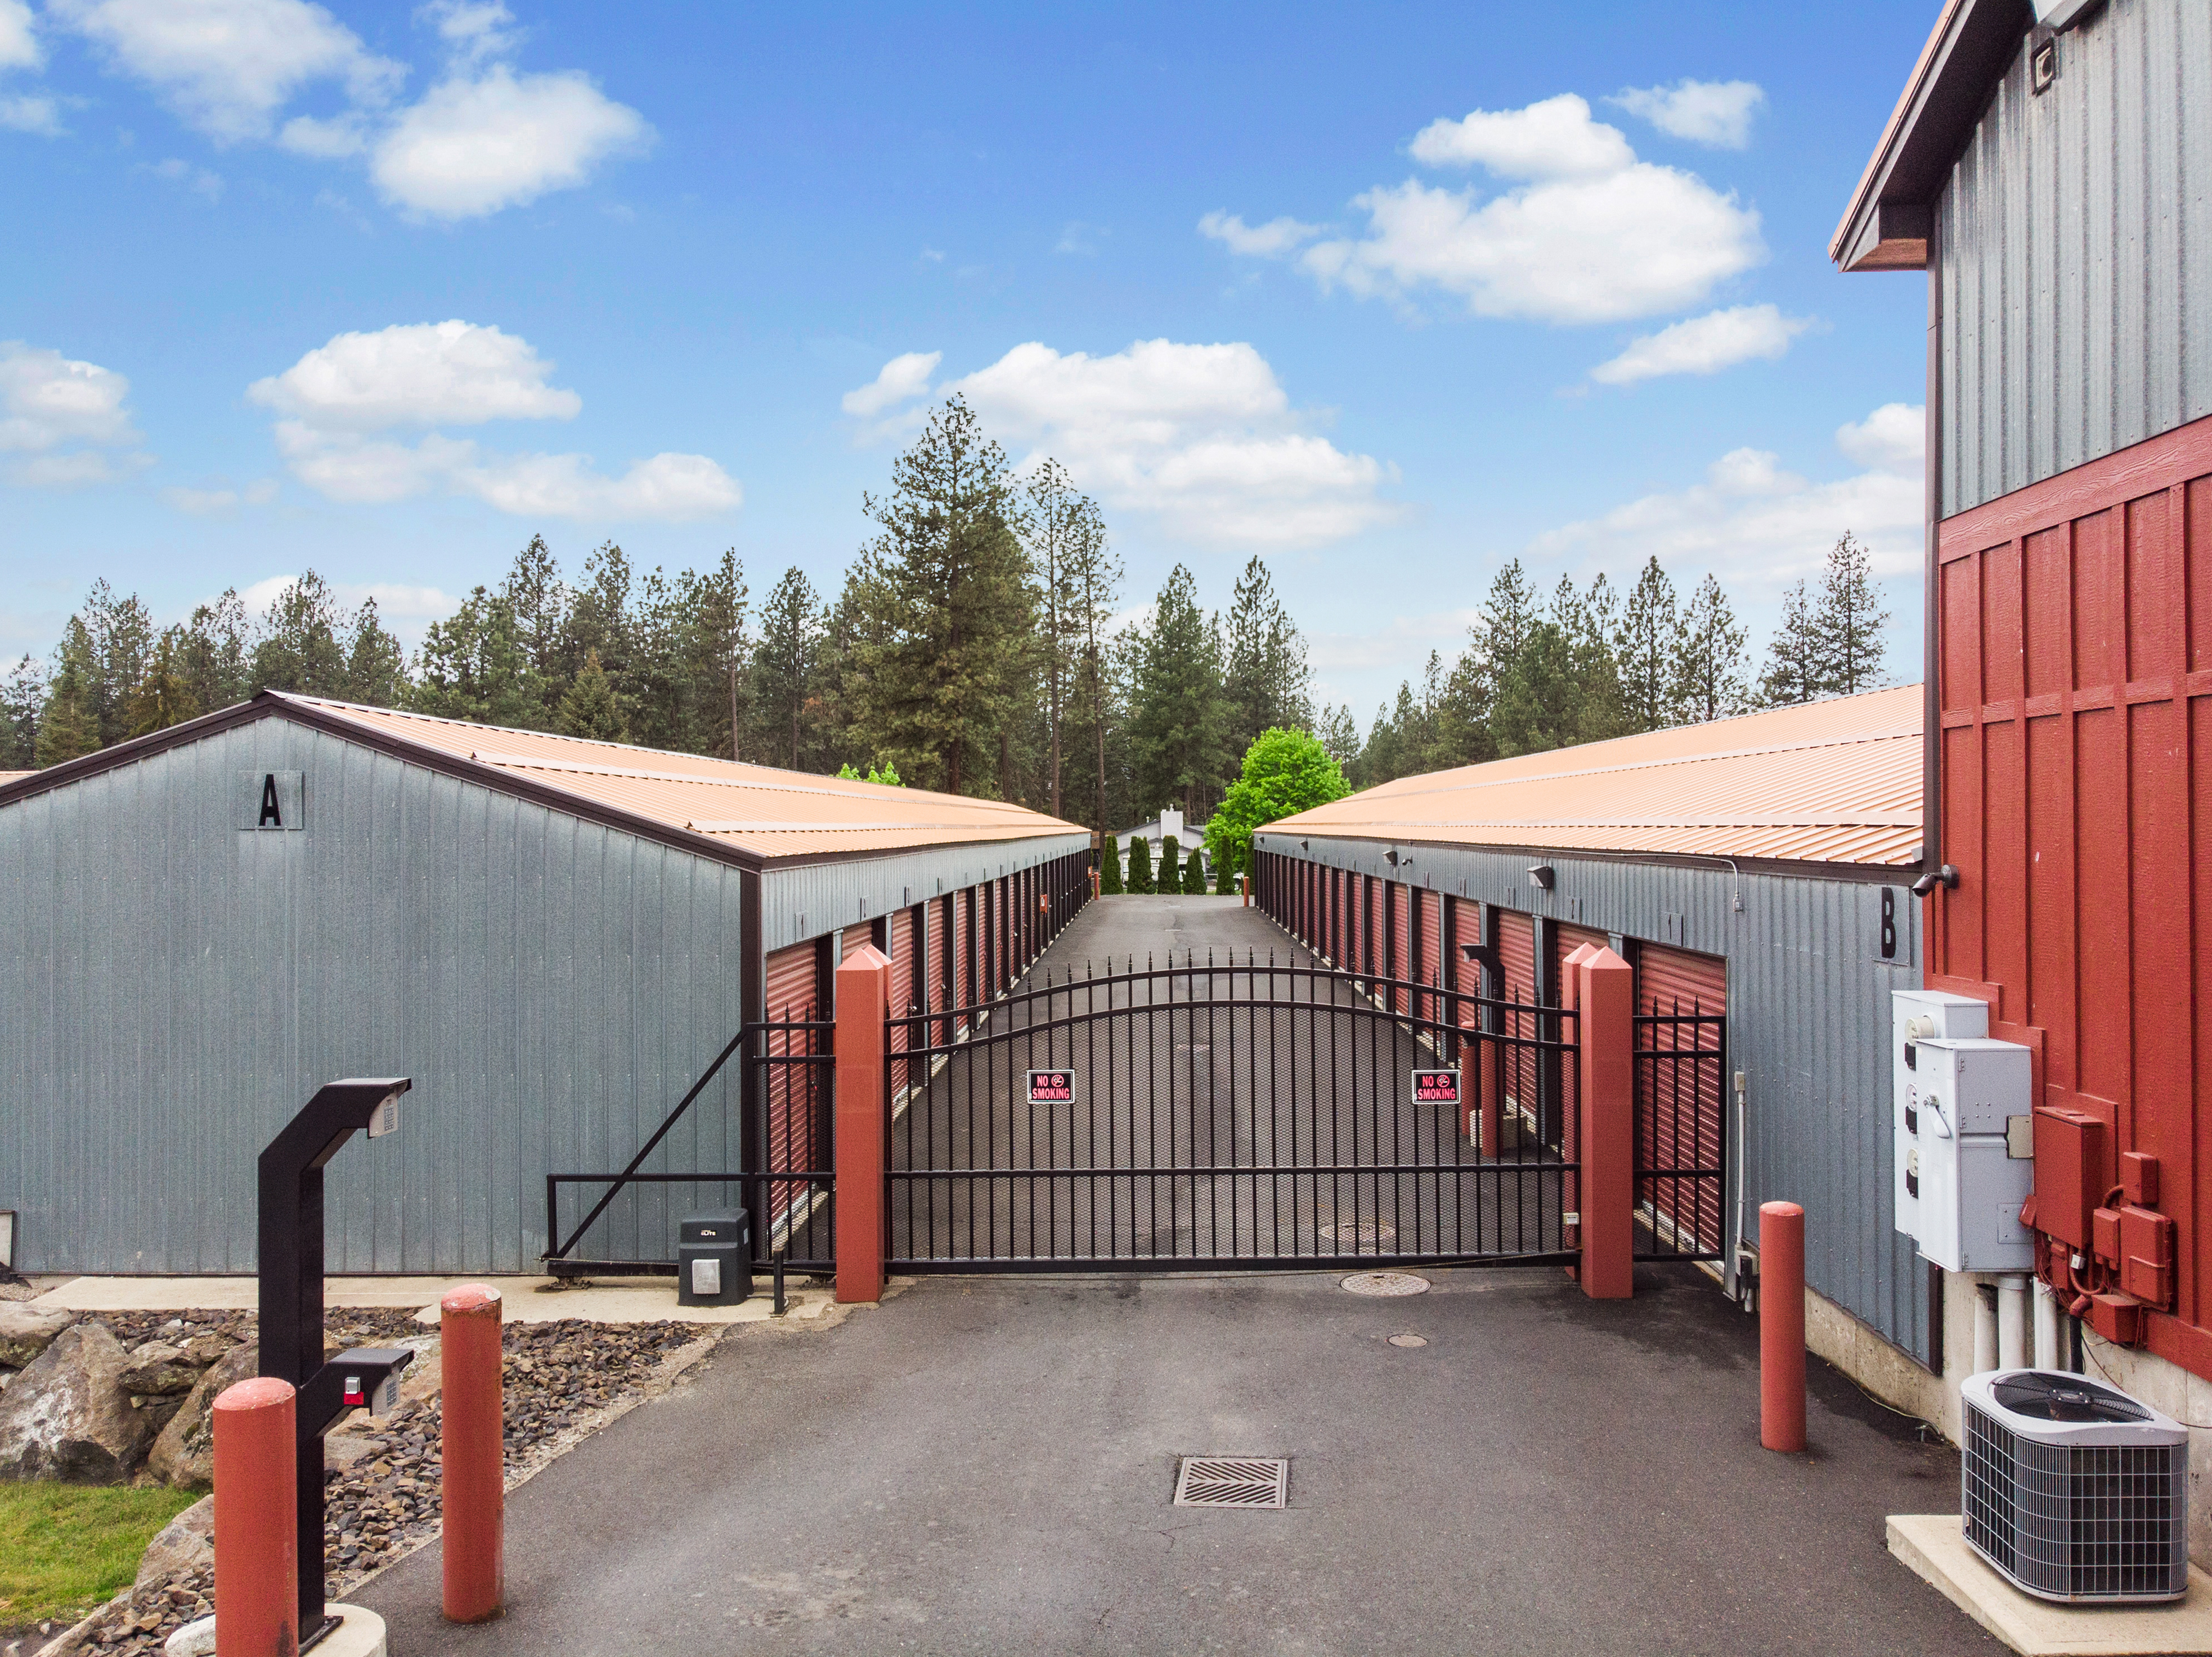 fenced and gated facility